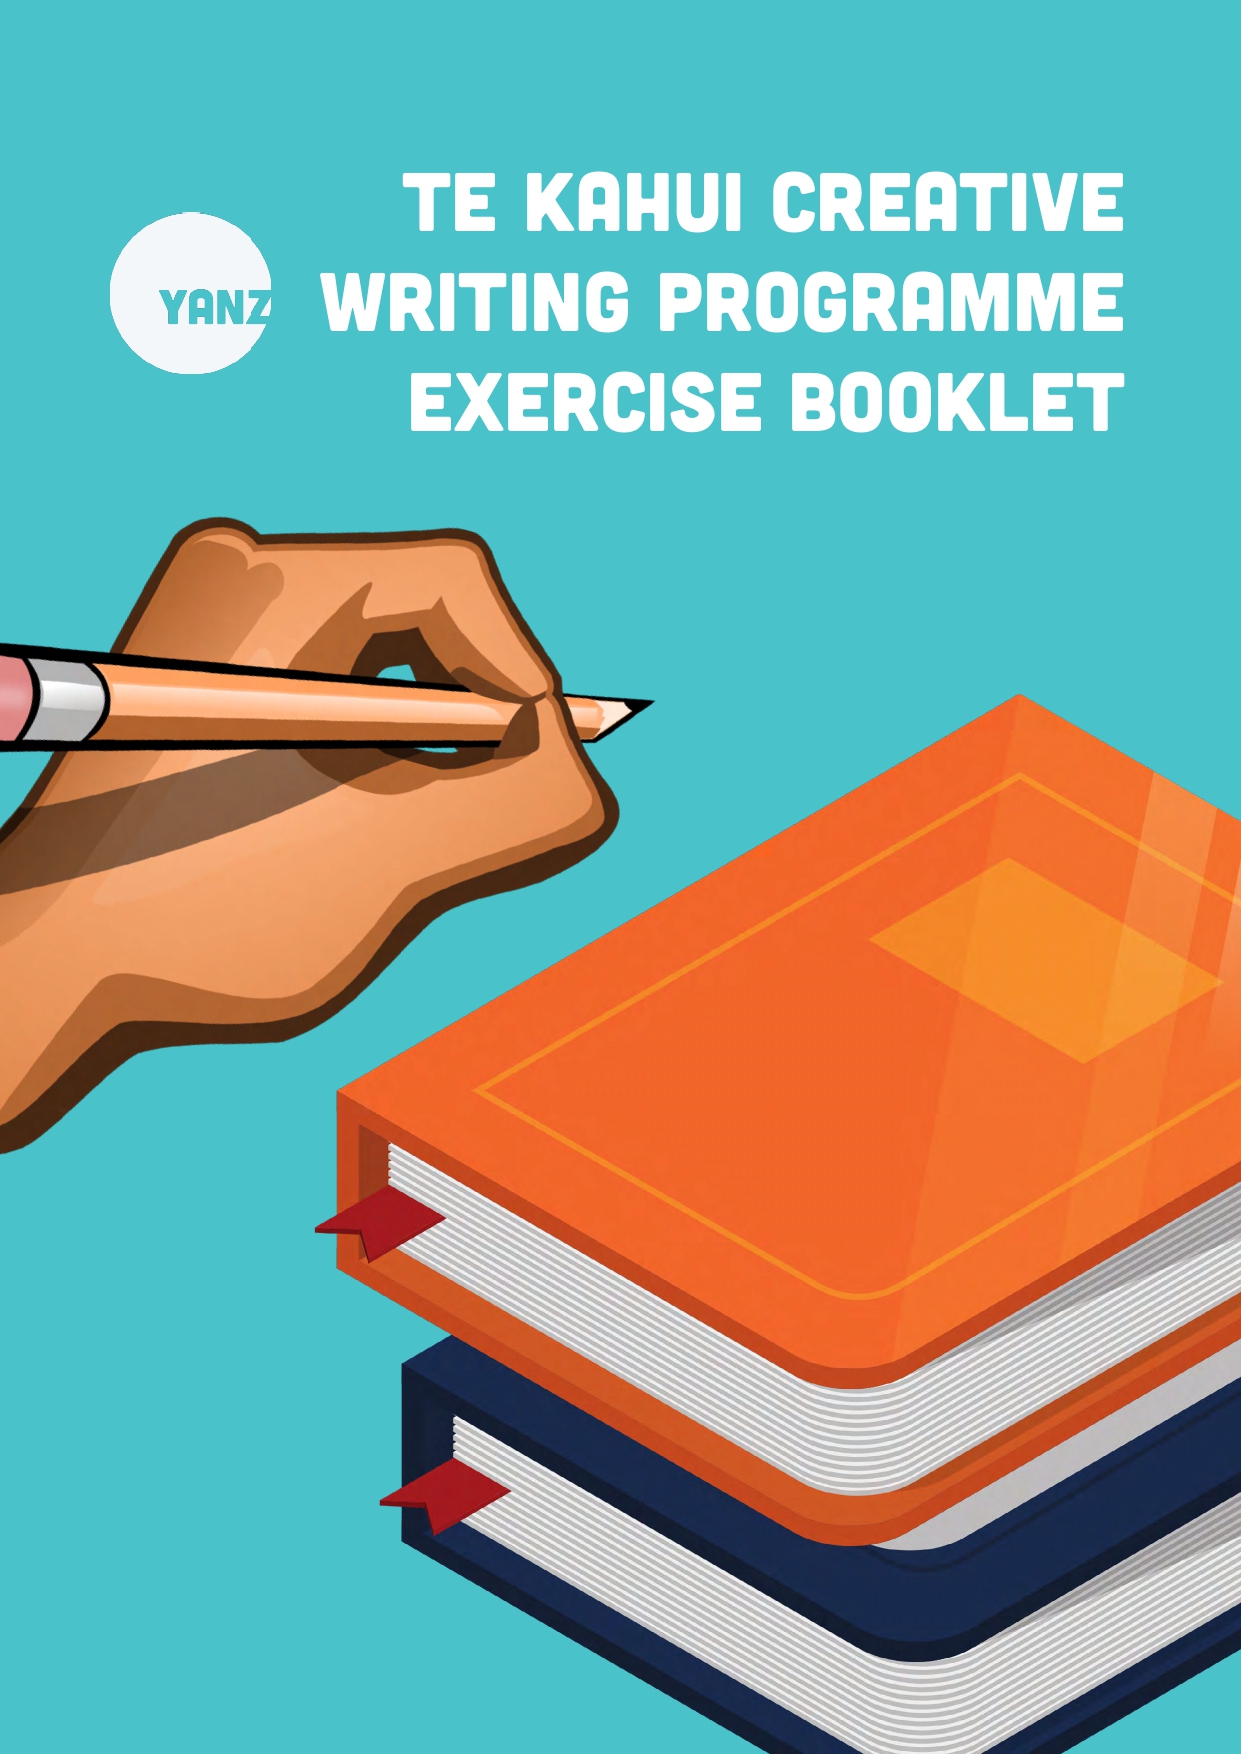 The bright blue and orange cover of a Te Kāhui creative writing exercise booklet